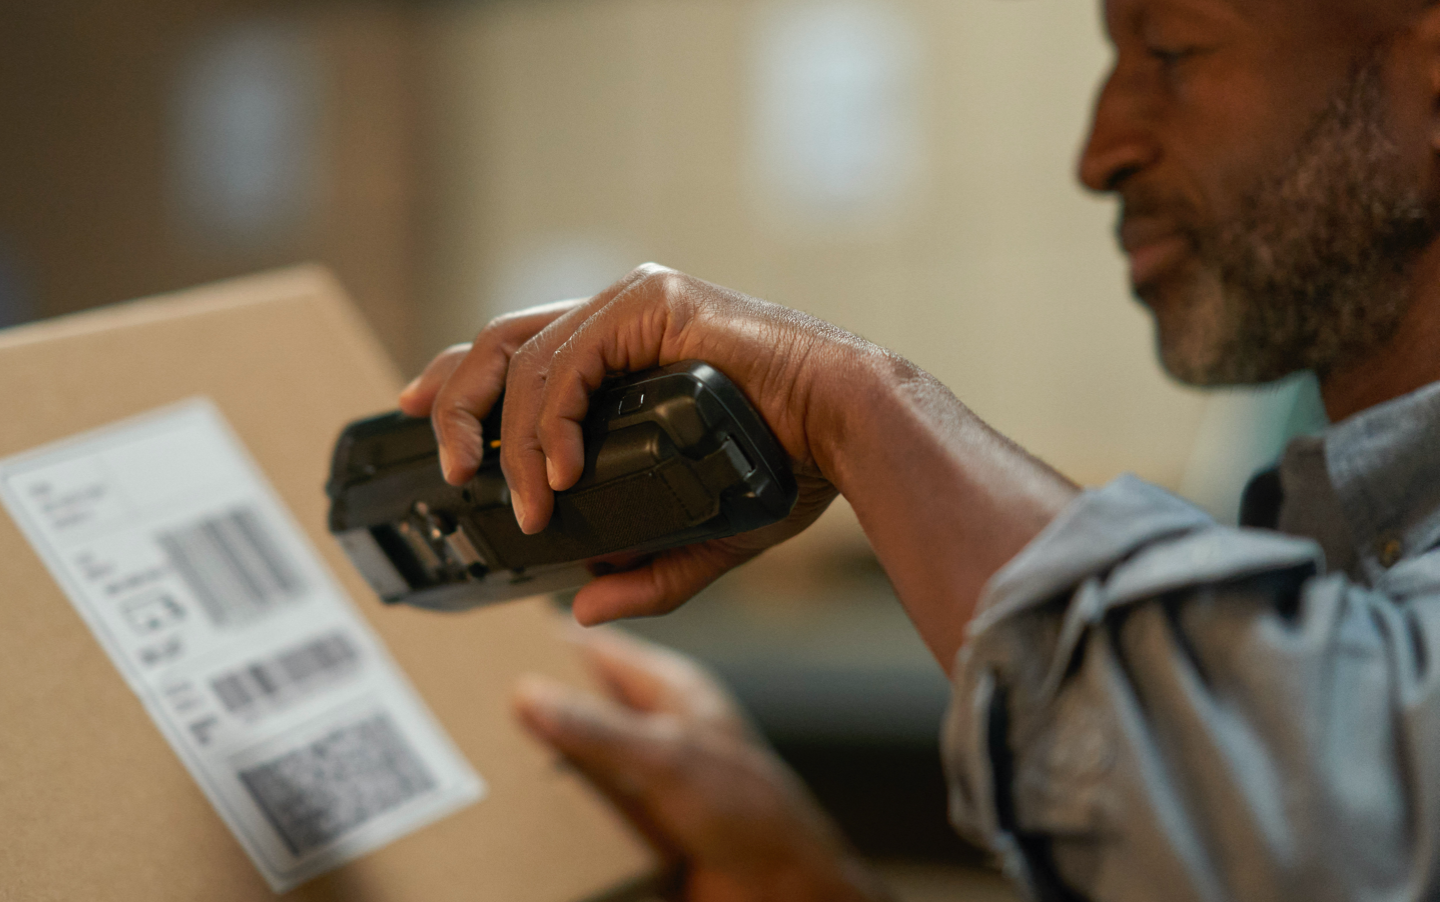 Man with barcode scanner scanning a label posted on a brown box.